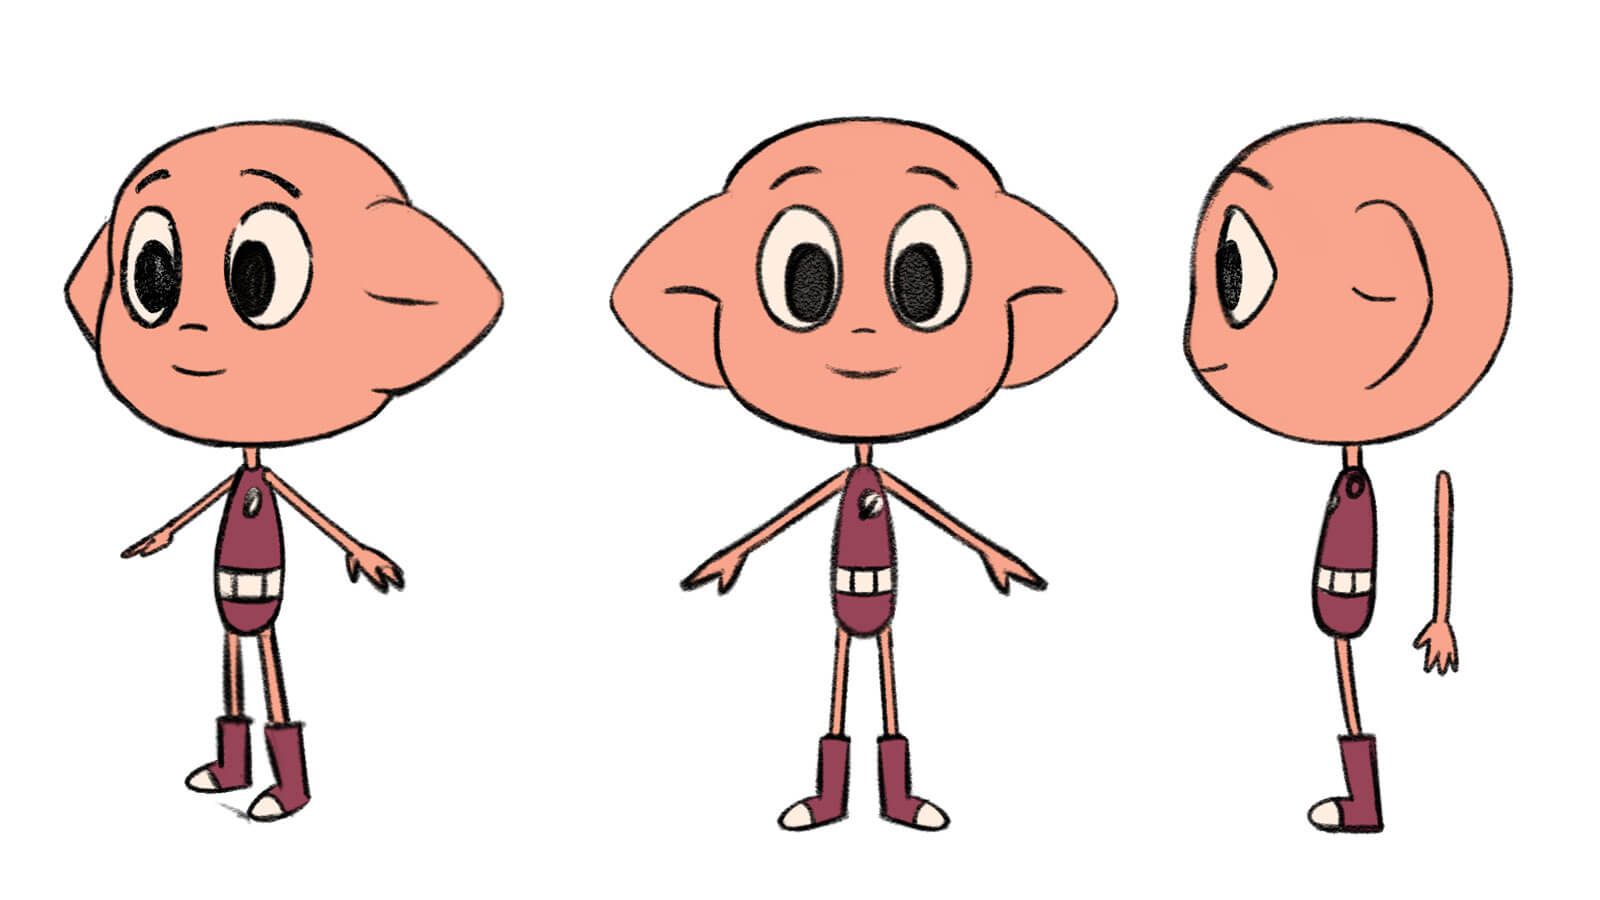 T-pose drawings of small alien from various angles